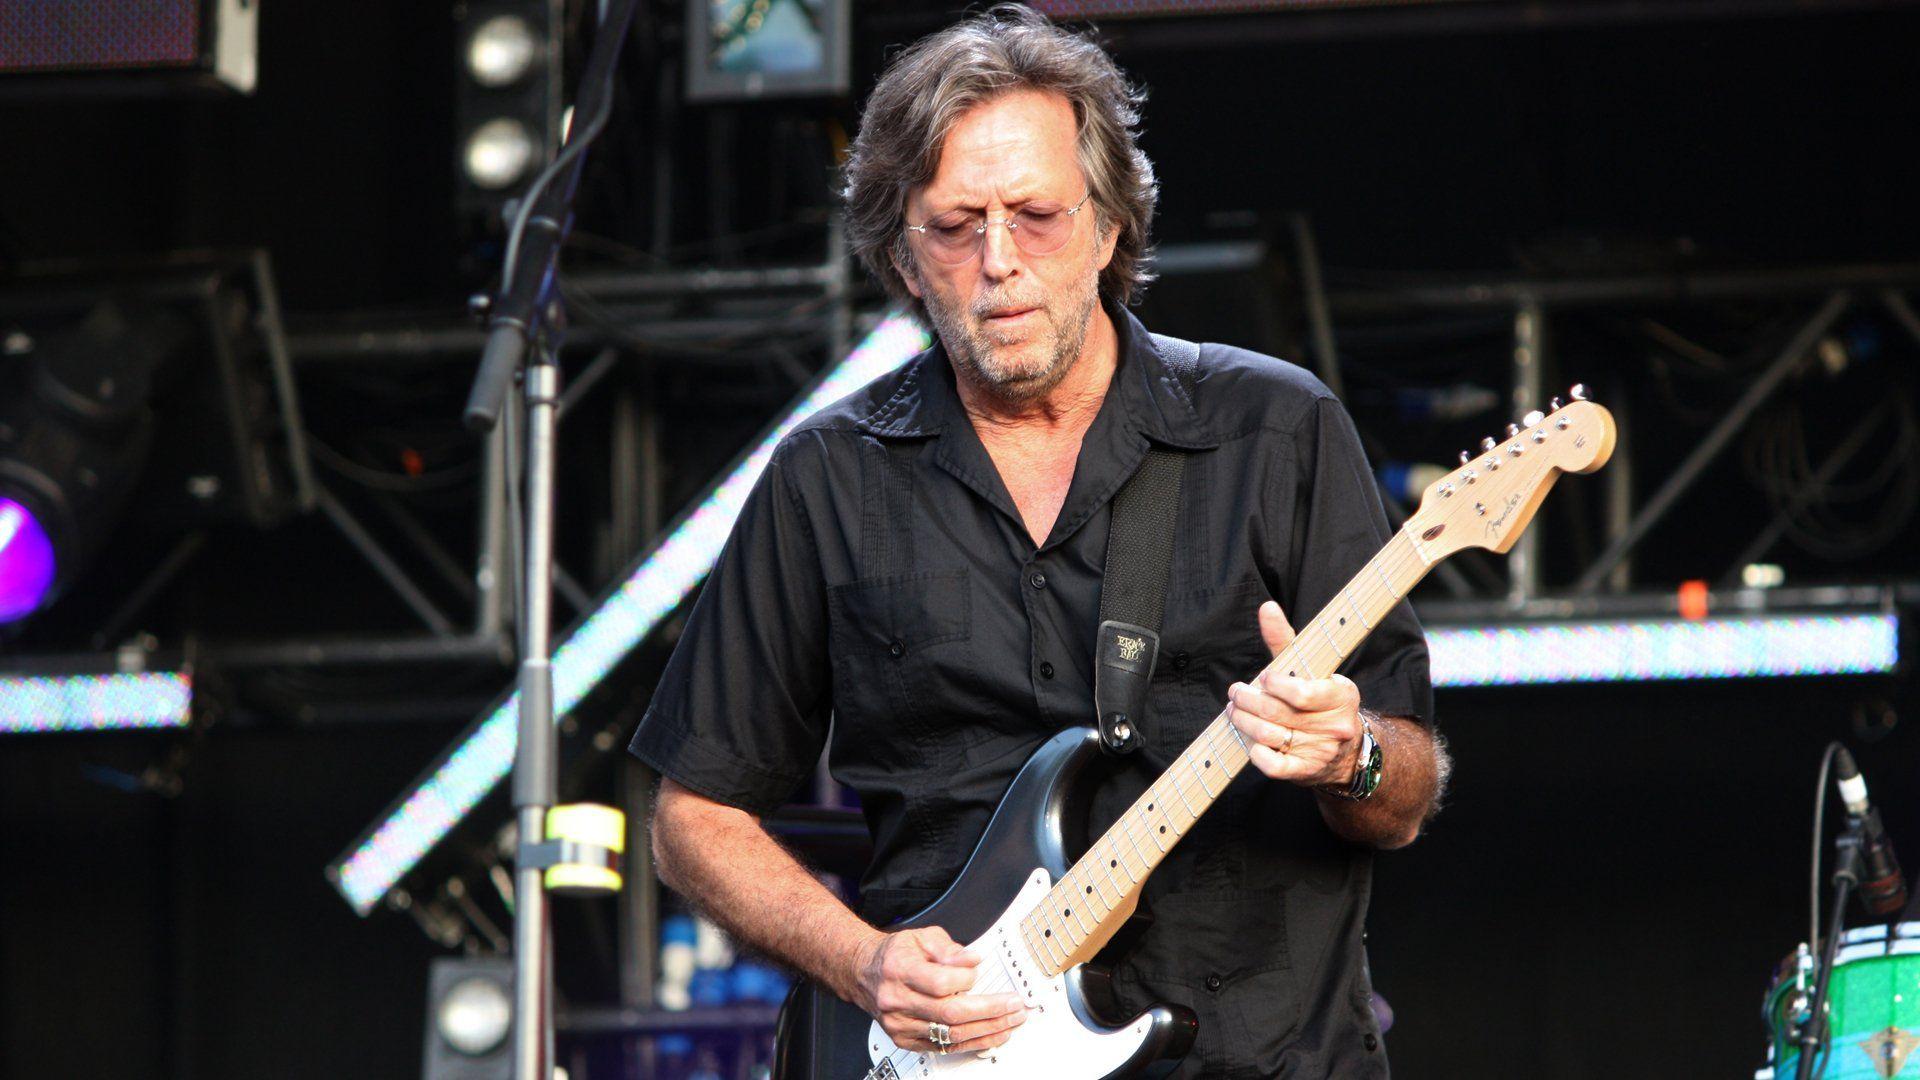 Eric Clapton Wallpaper for PC Full HD Picture. HD Wallpaper